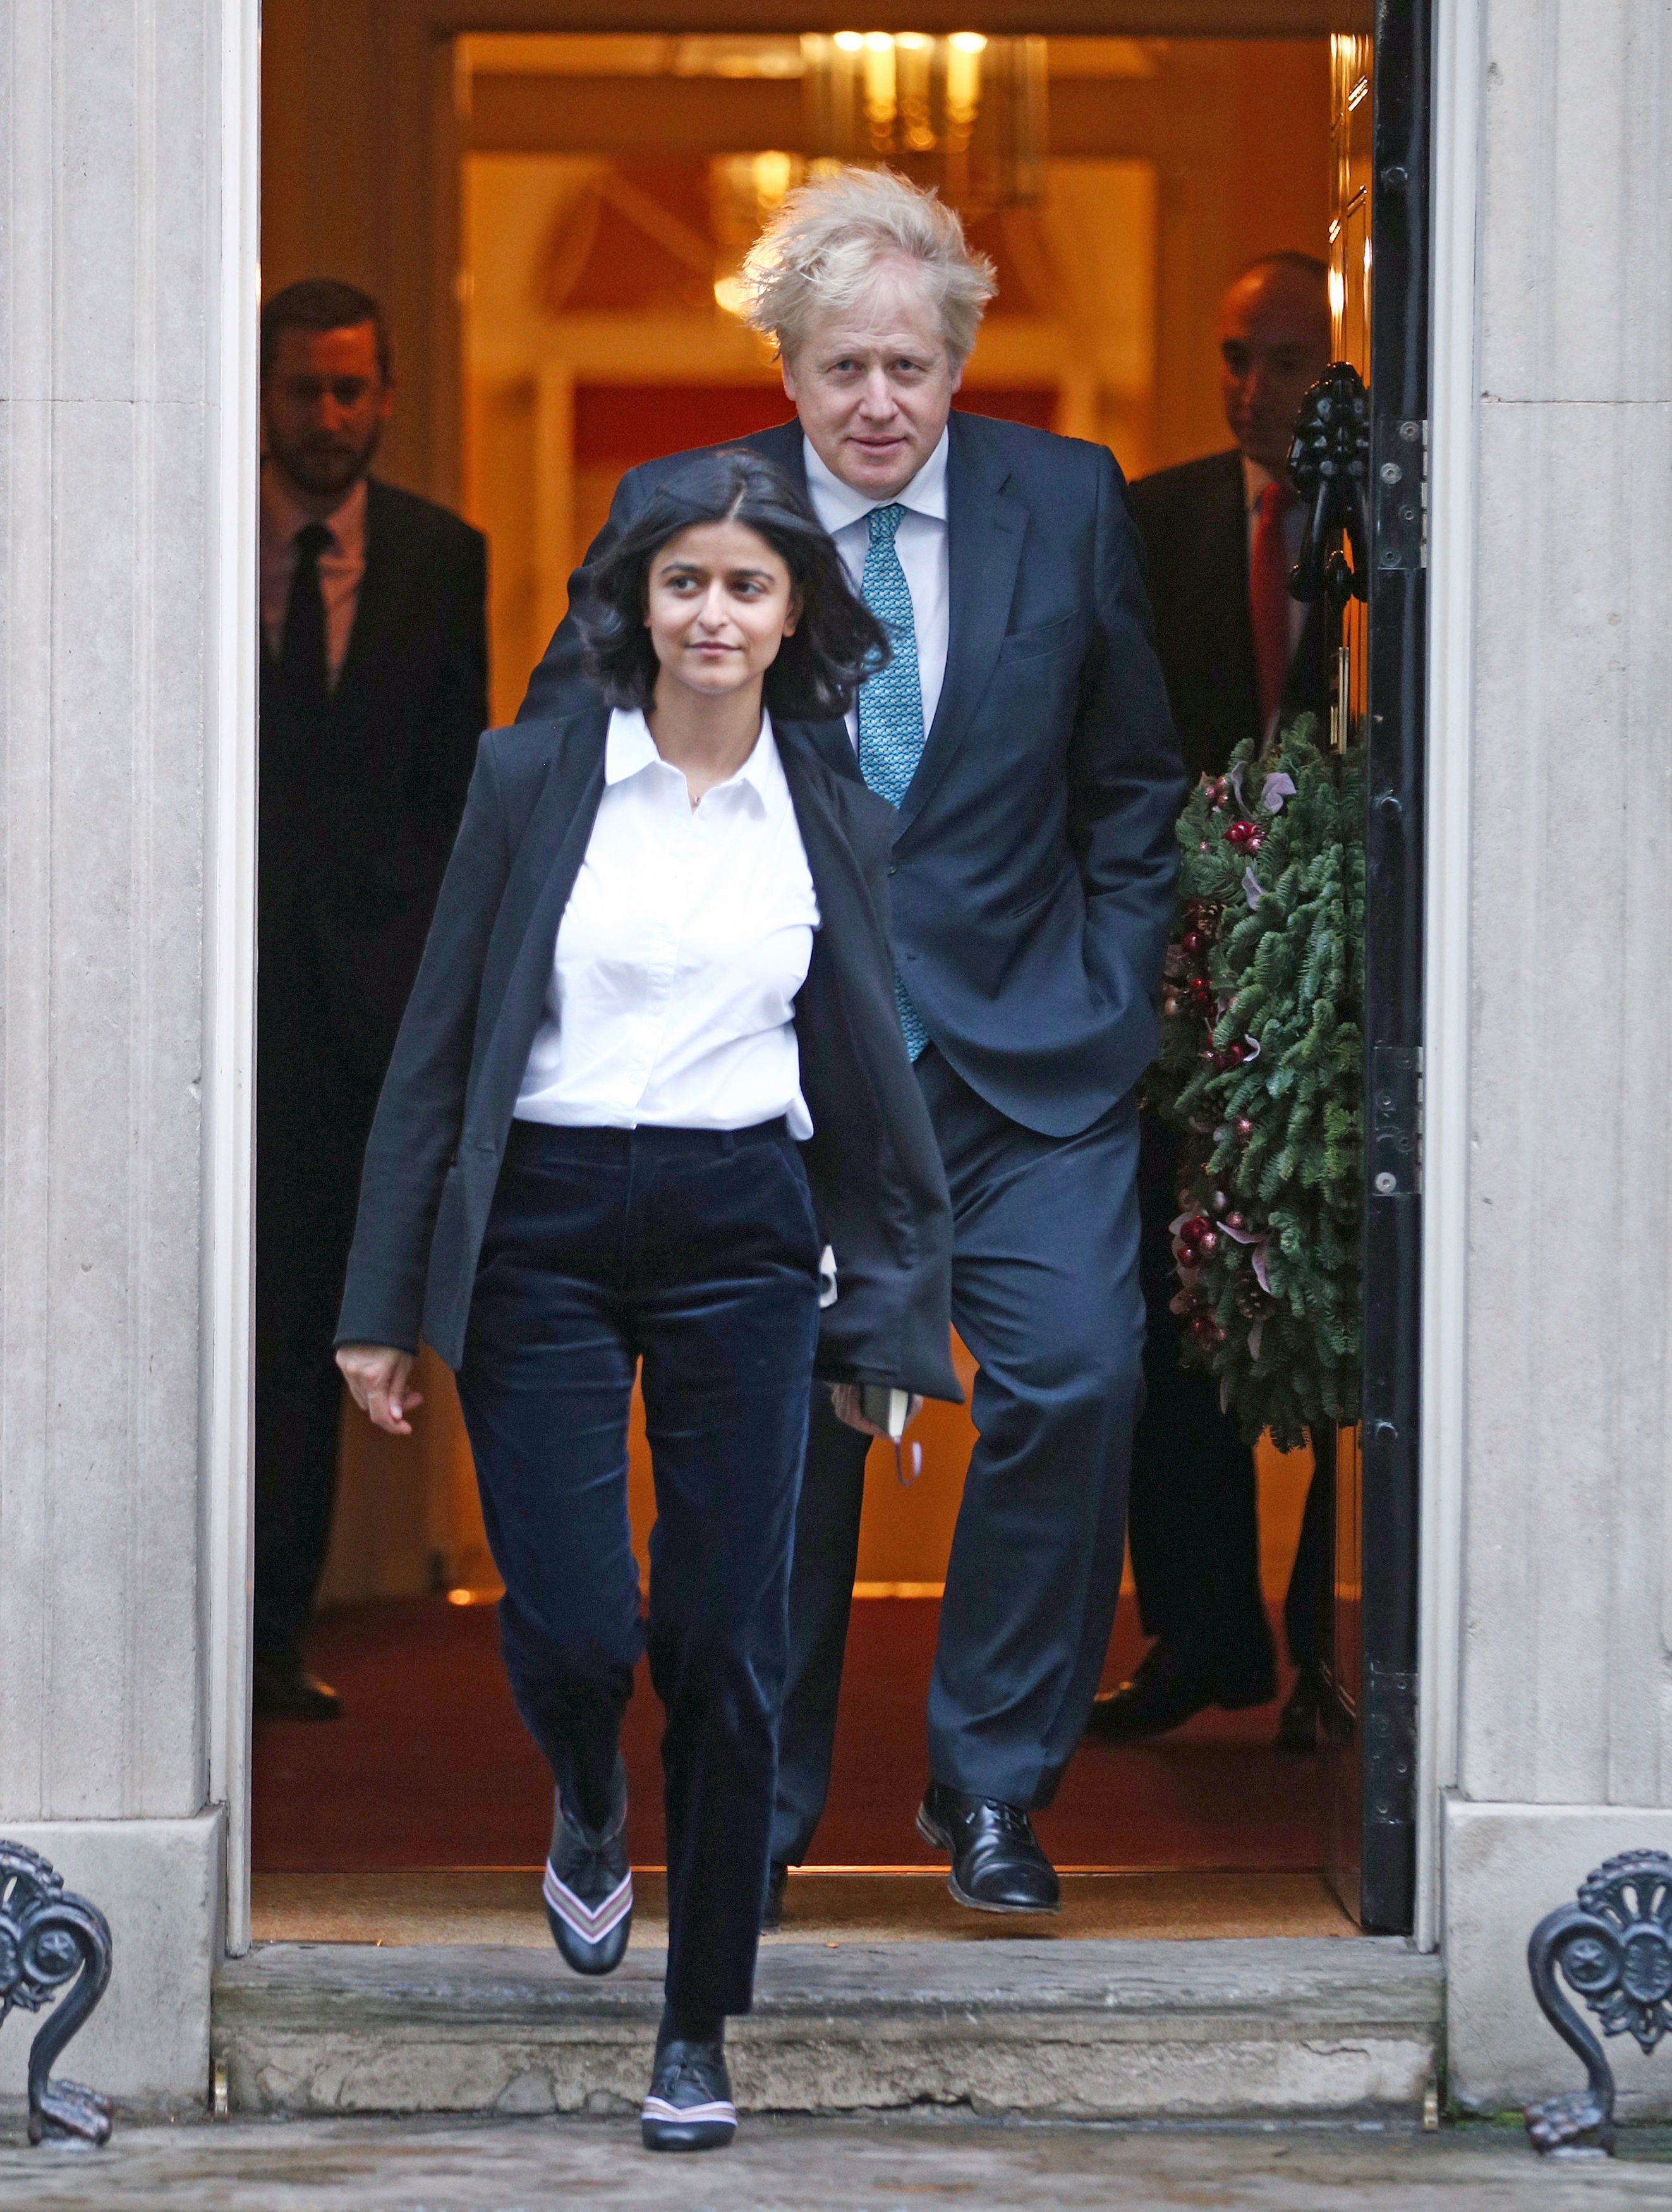 Boris Johnson pictured in December 2020 with Munira Mirza, director of the No 10 Policy Unit, who resigned on Thursday